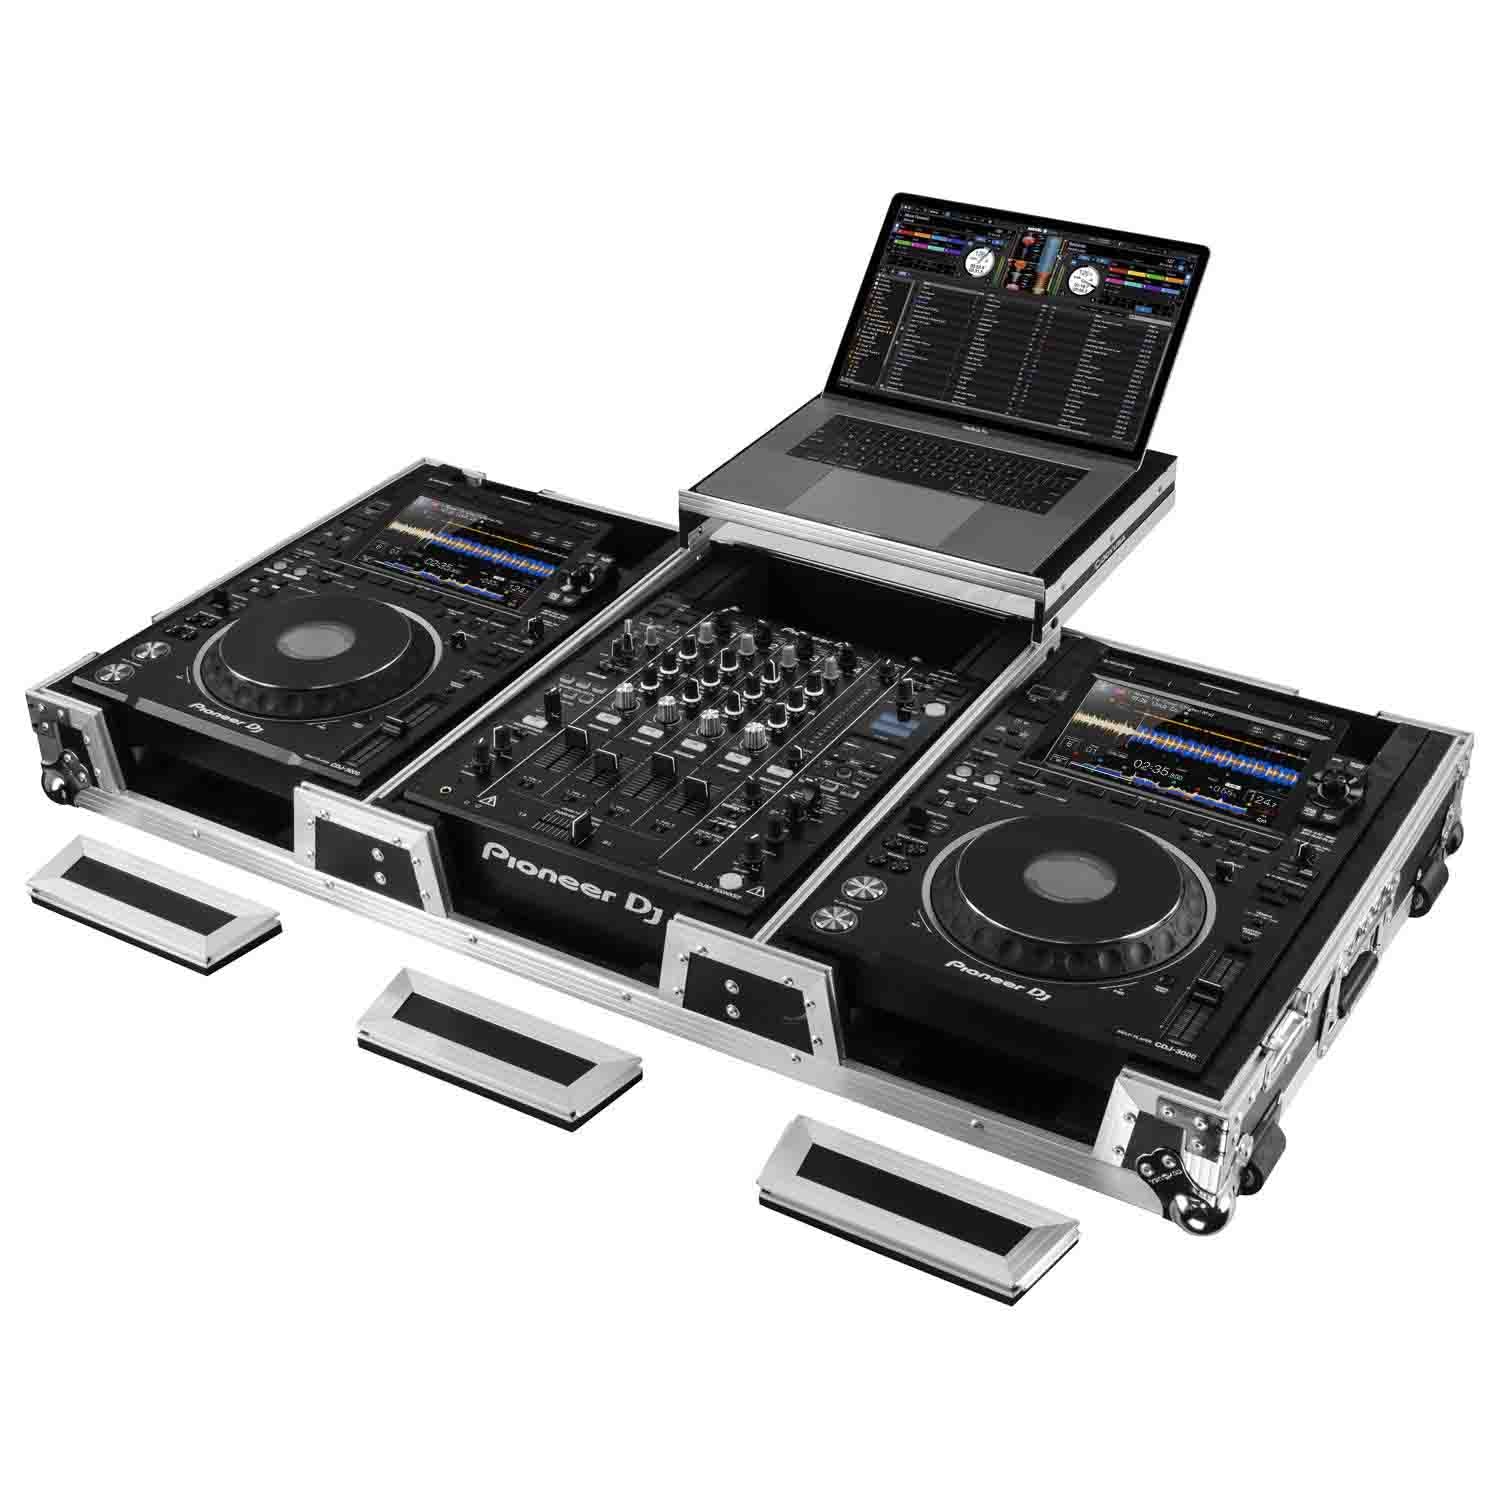 Open Box: Odyssey FZGS12CDJWXD2 Extra Deep DJ Coffin Case for 12″ Format DJ Mixer and Two Media Players with Glide Platform Odyssey